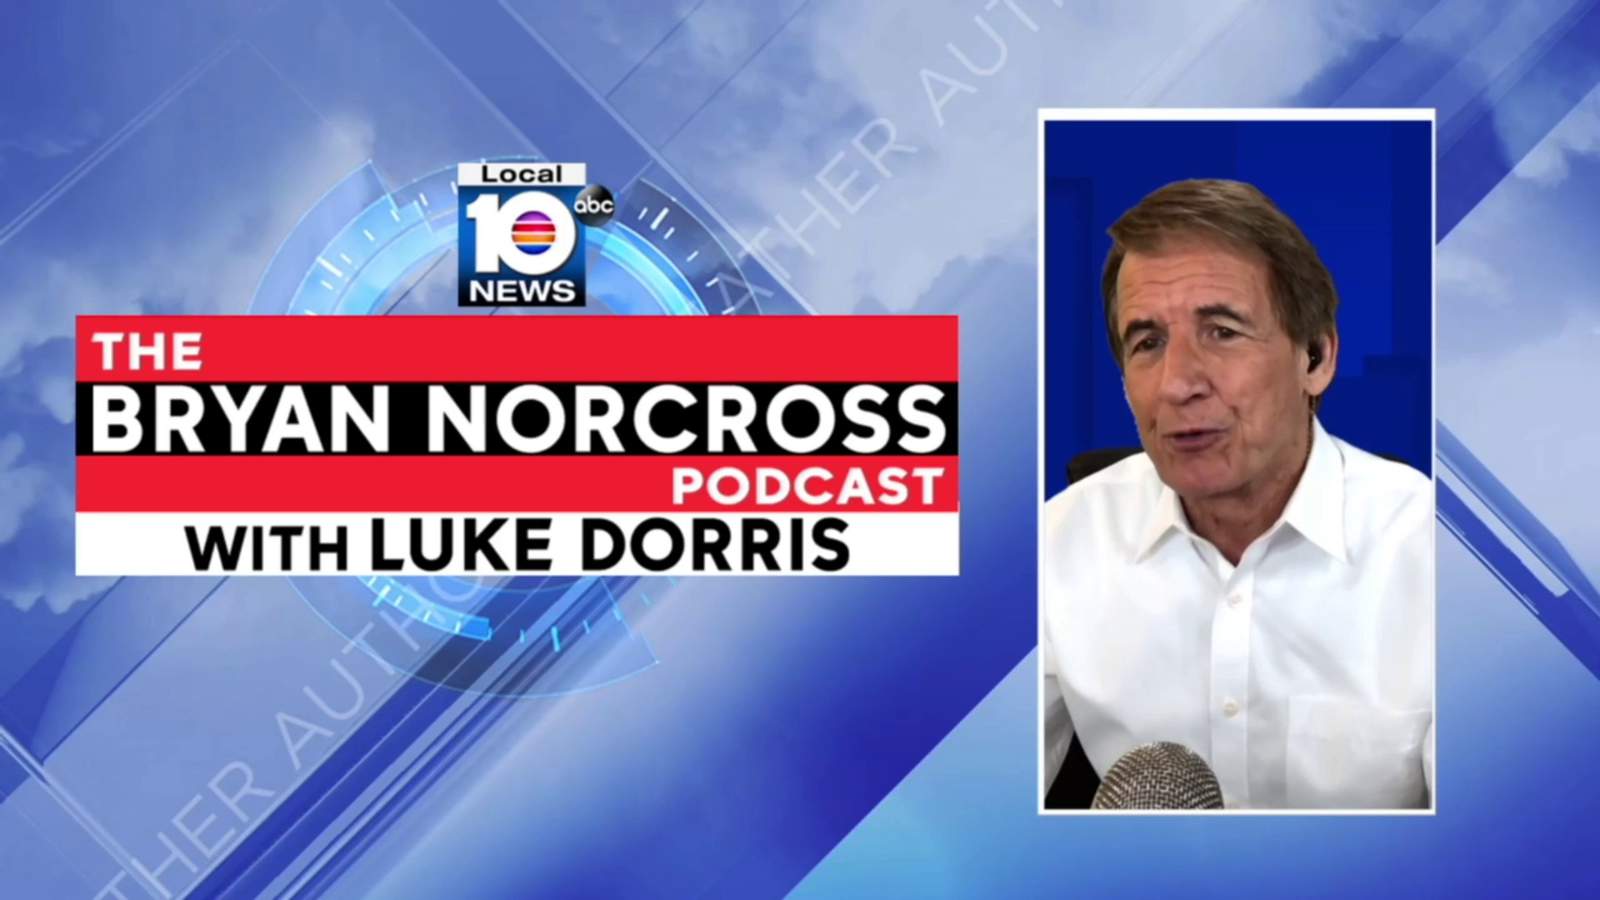 Bryan Norcross Podcast - The new 2020 hurricane season outlook with Dr. Louis Uccellini